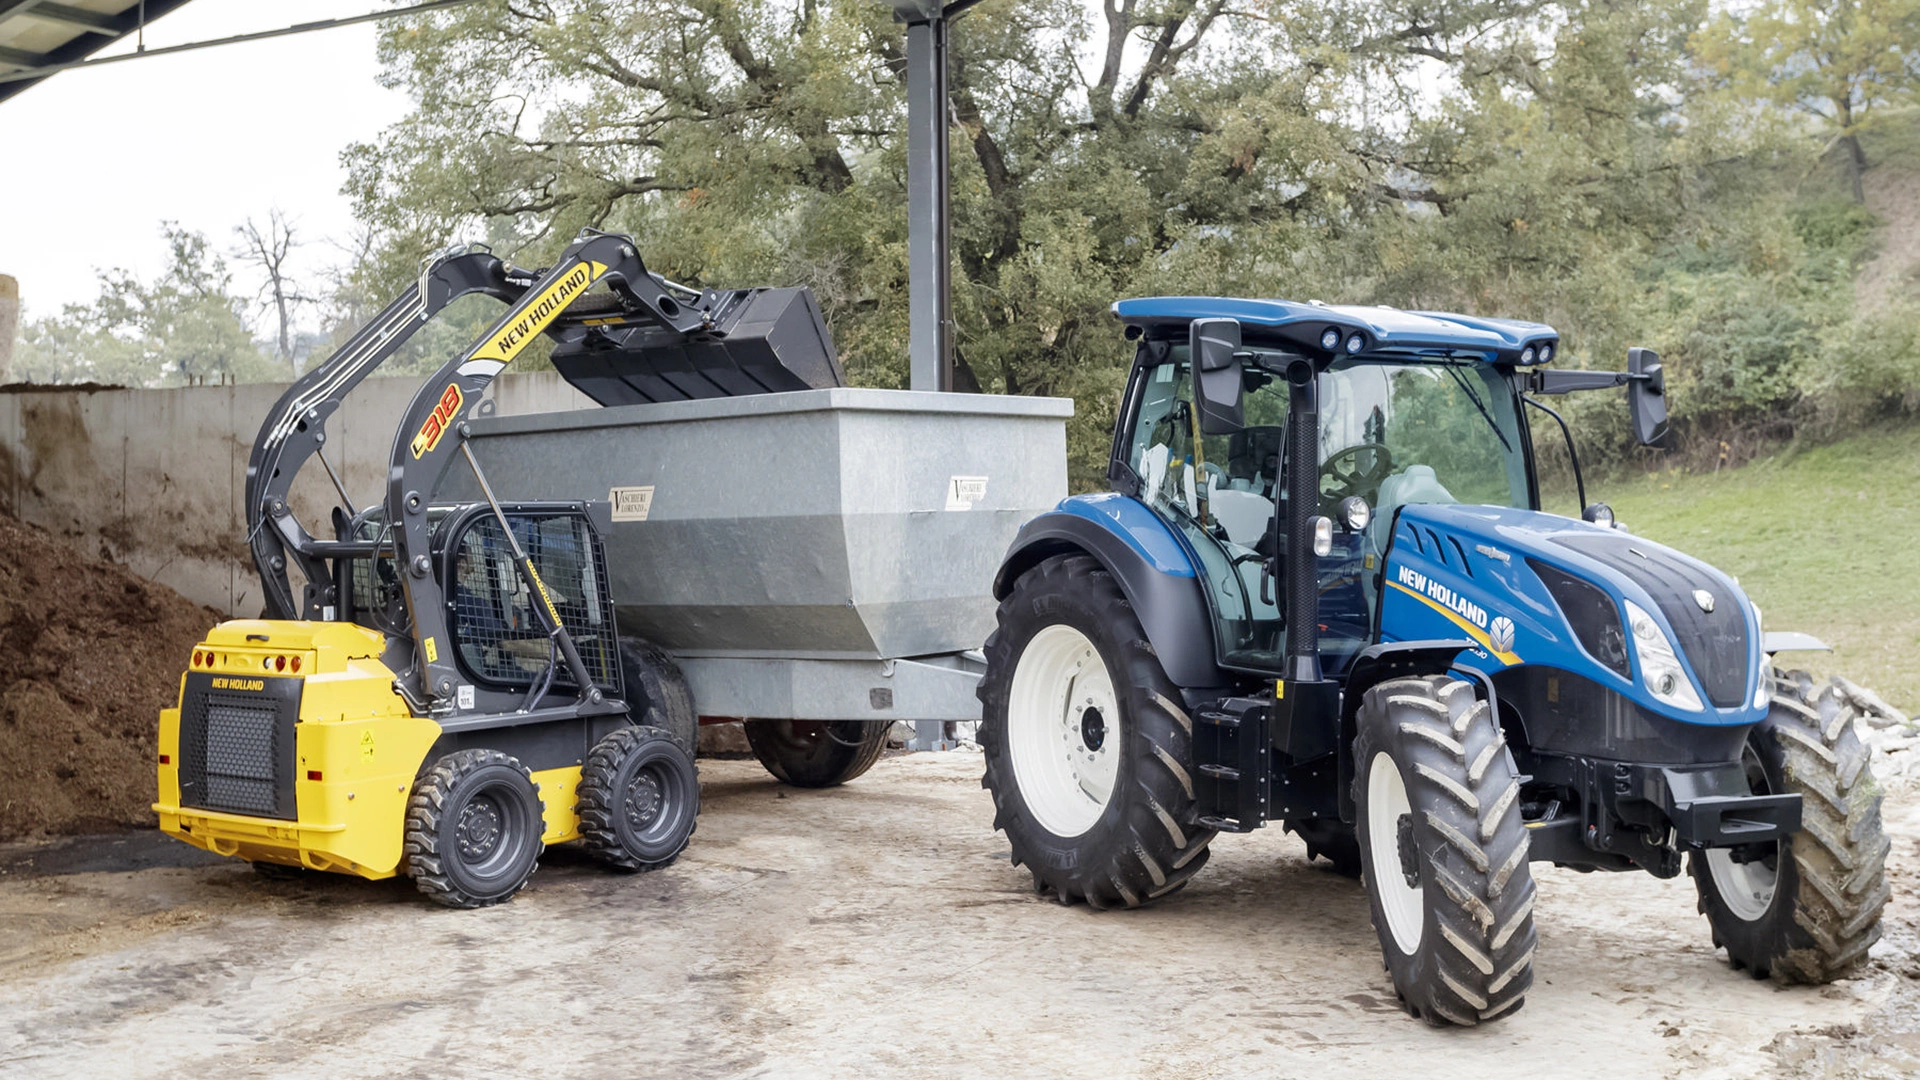 A New Holland skid steer loader is seen transferring material to a gray trailer, while nearby a New Holland blue tractor is parked.